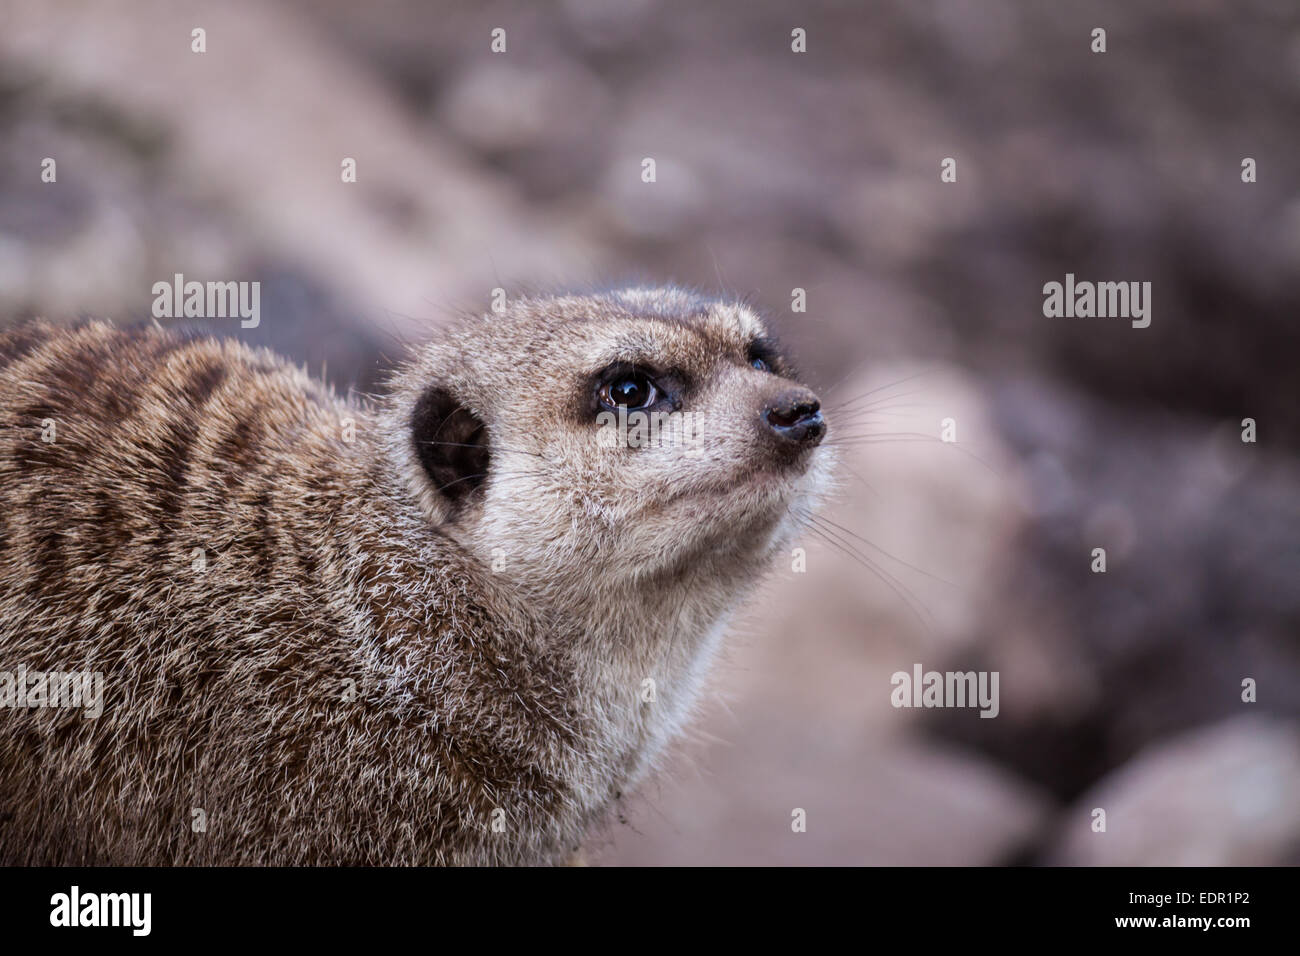 Closeup of a meerkat in a zoo Stock Photo